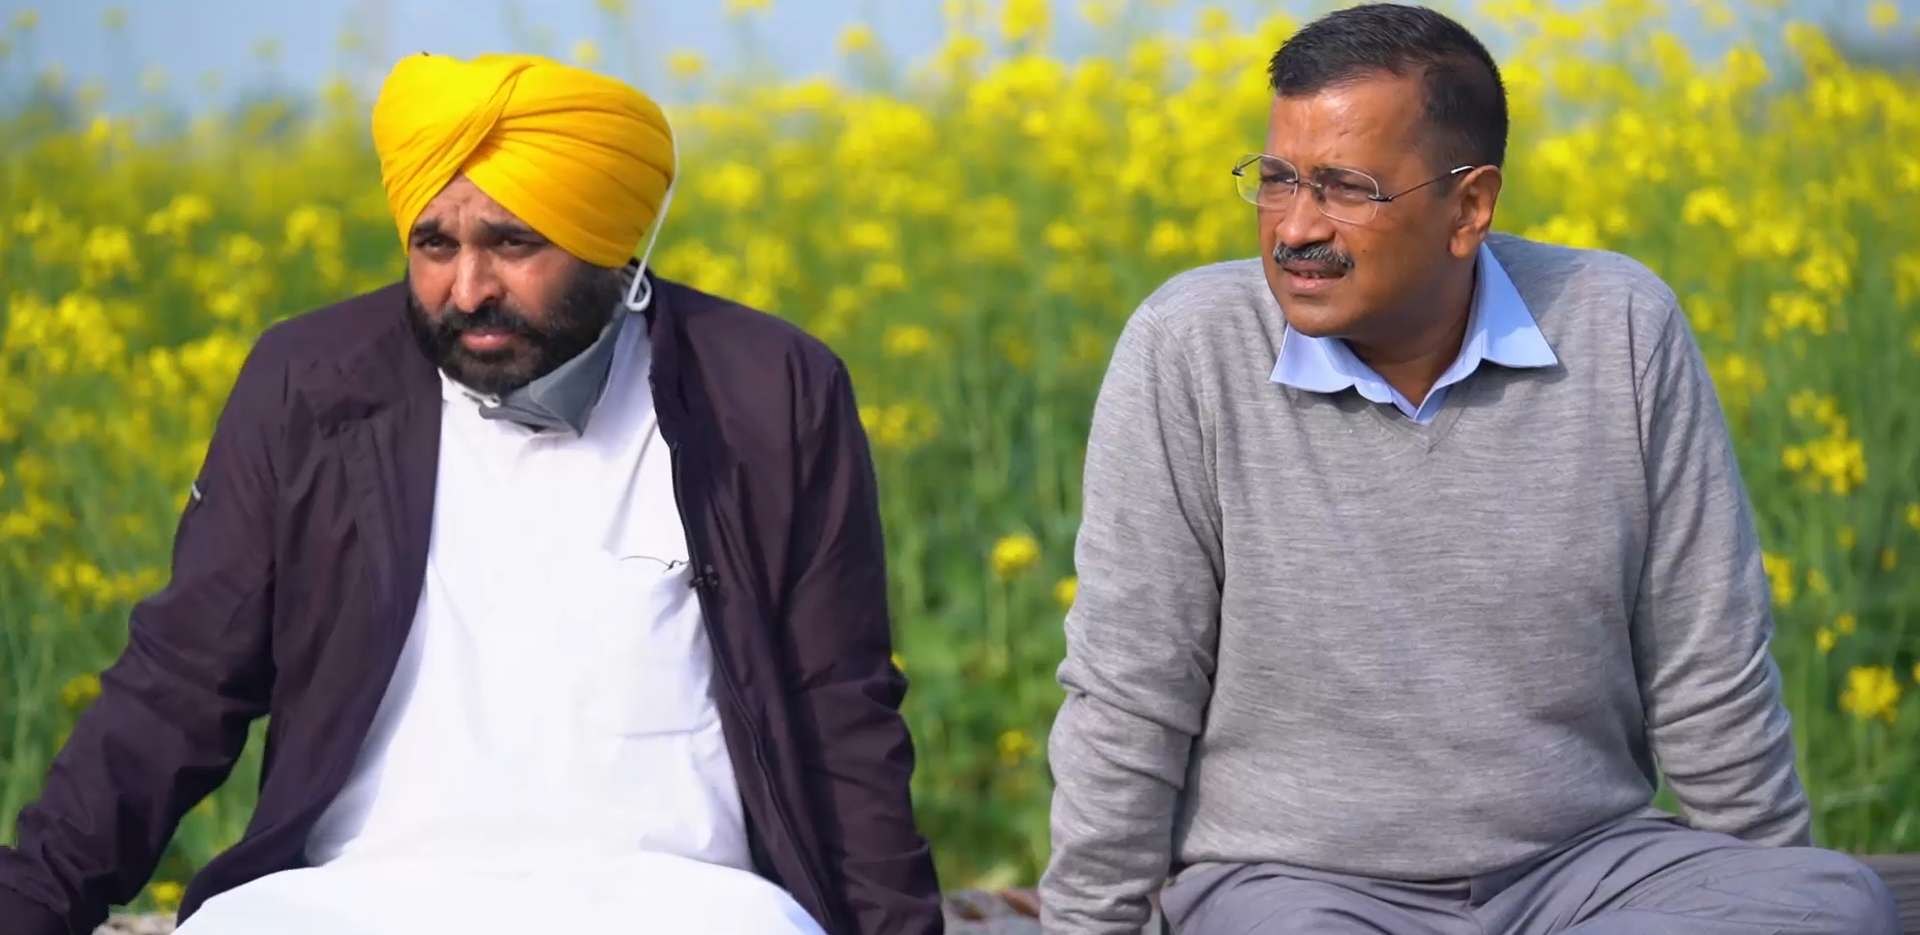 ArvindKejriwal along with BhagwantMann meets farmers of Punjab CM Channi’s constituency: